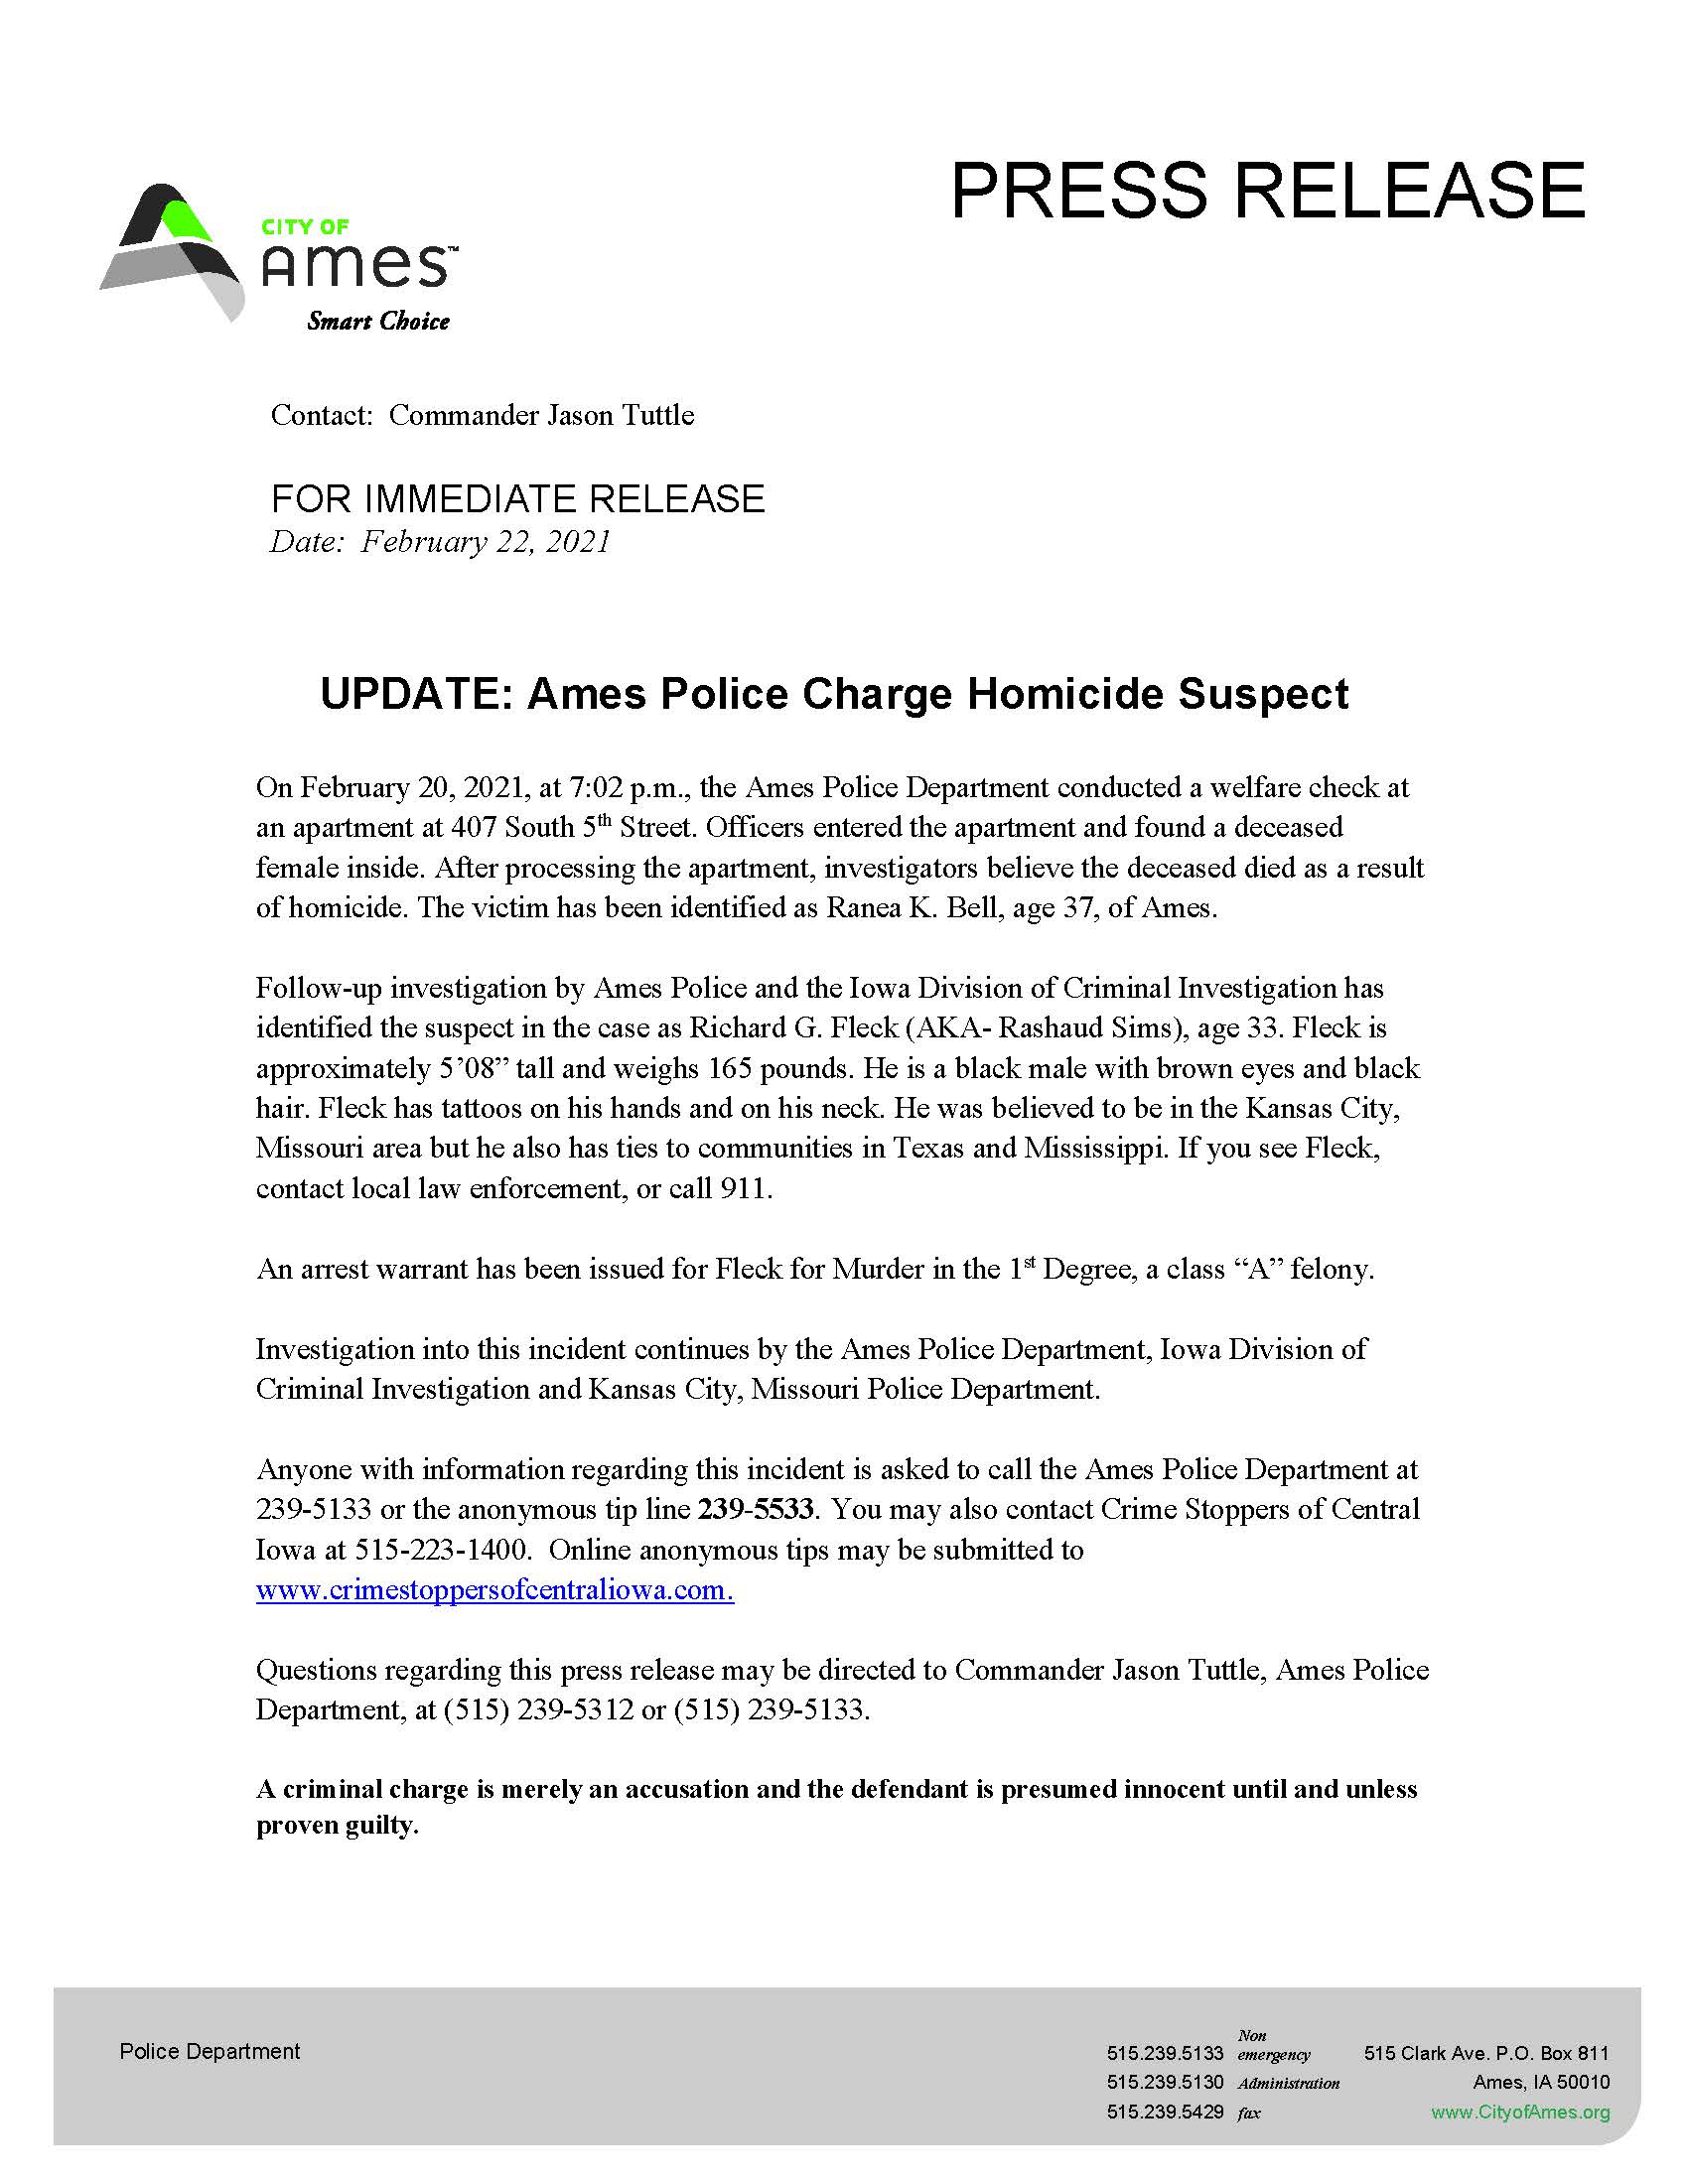 Link to Ames update press release